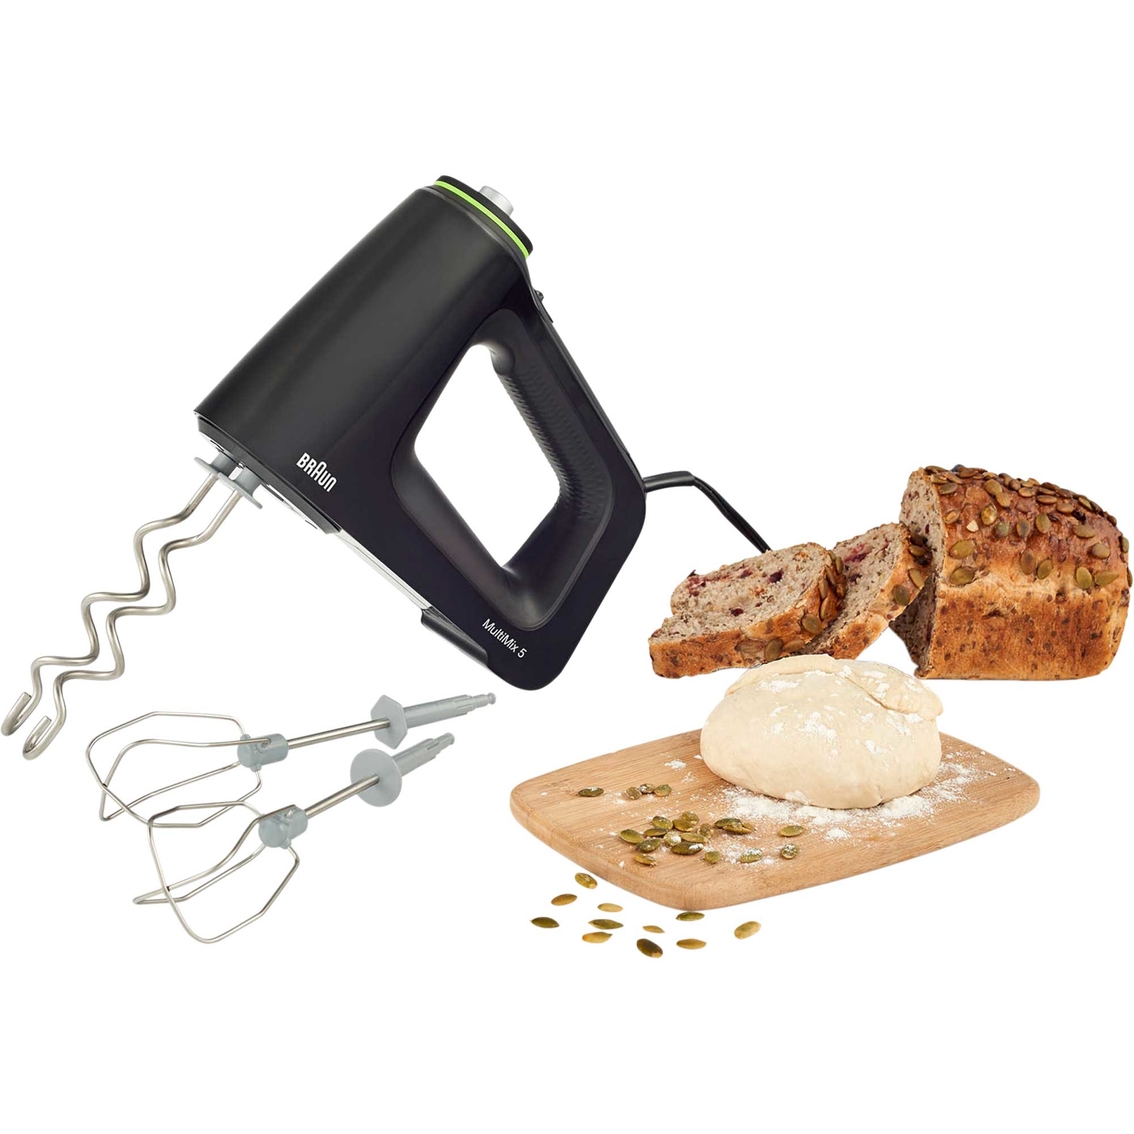 Braun MultiMix 5 Hand Mixer with Multi Whisks and Dough Hooks - Image 7 of 10